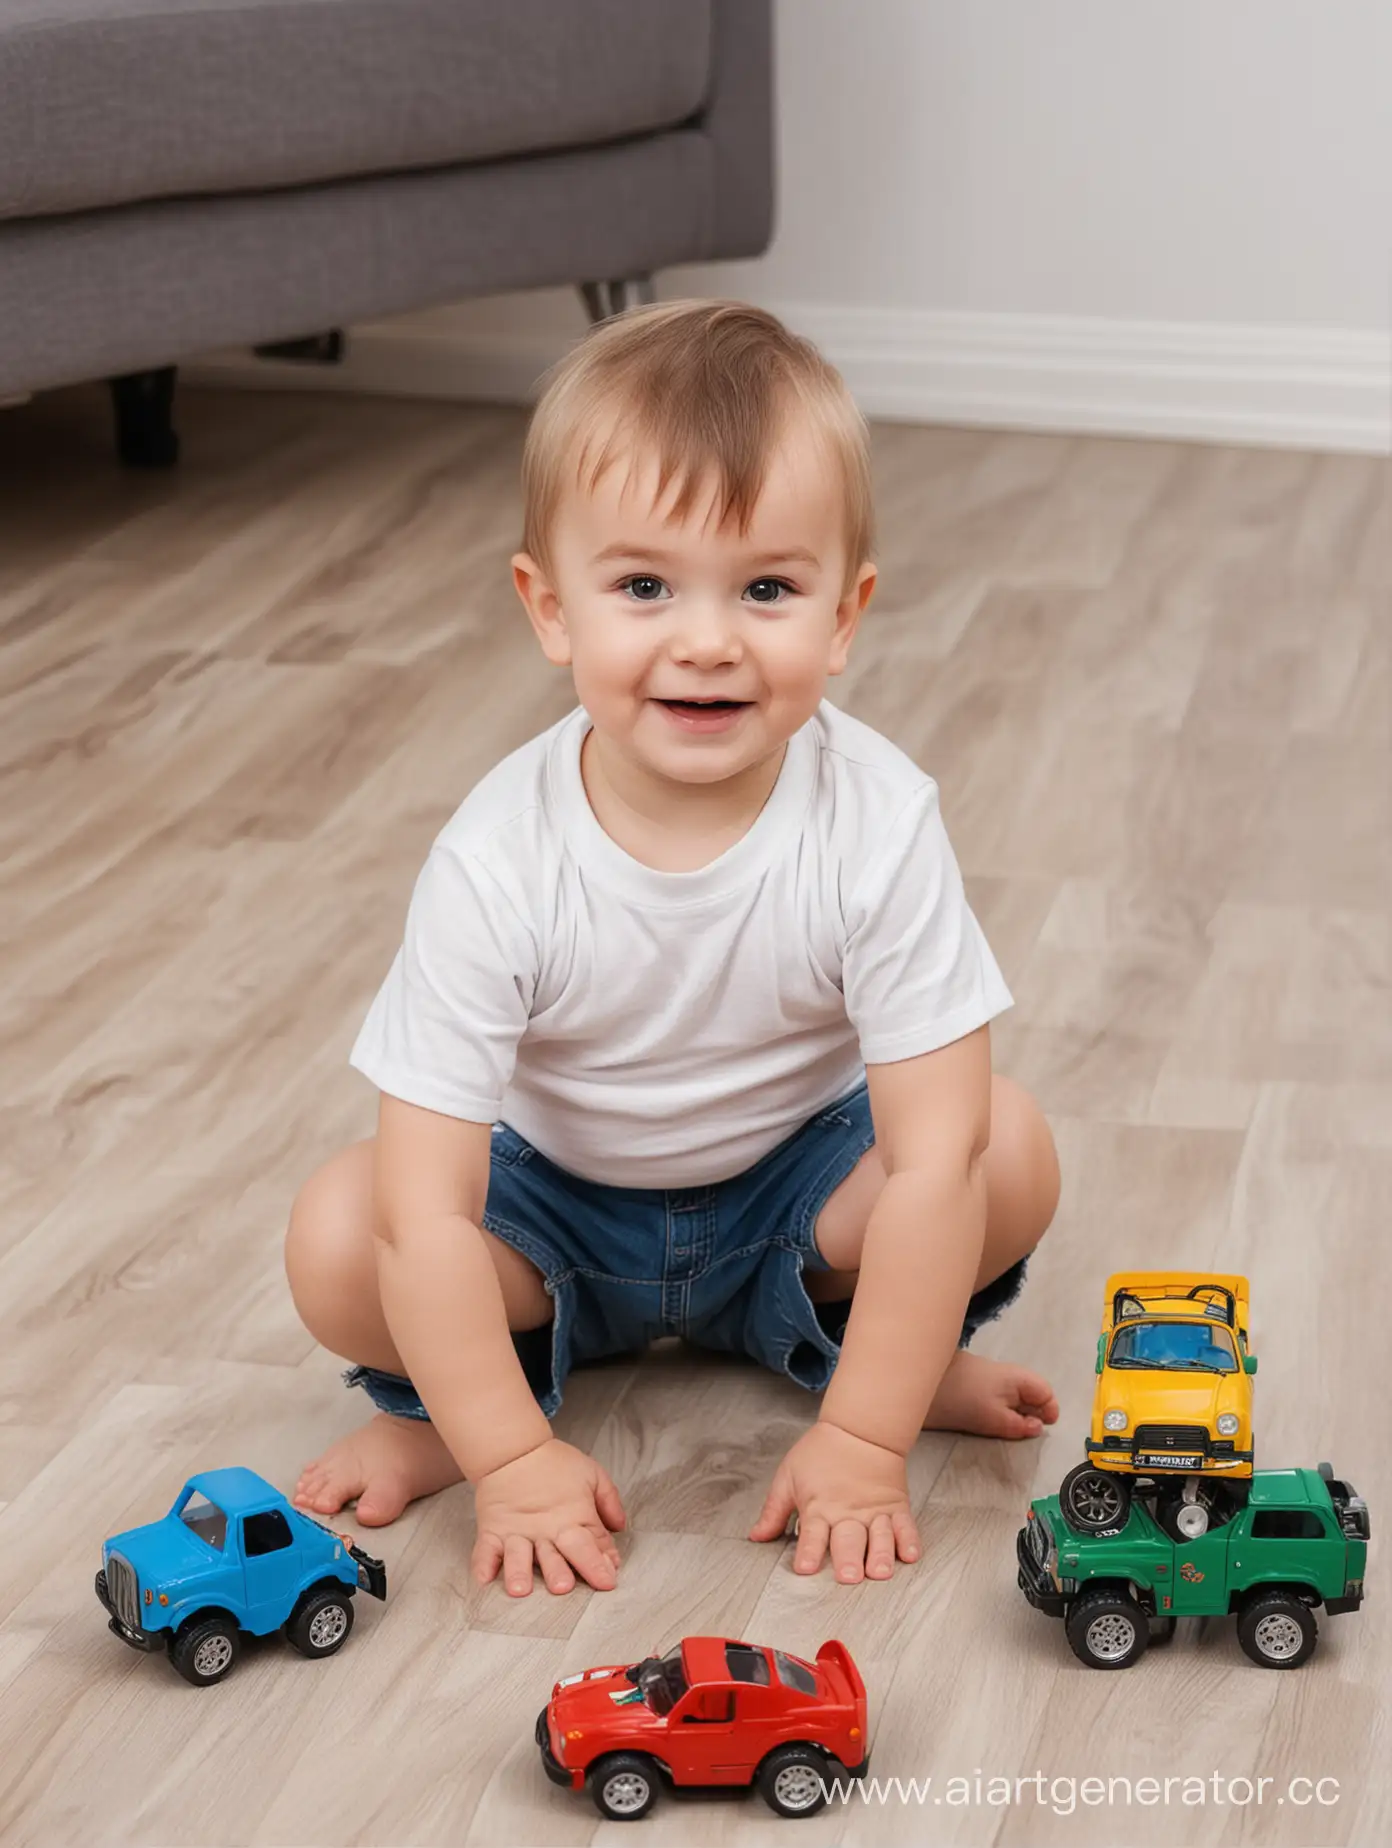 Joyful-Toddler-Engaged-in-Play-with-Colorful-Toy-Cars